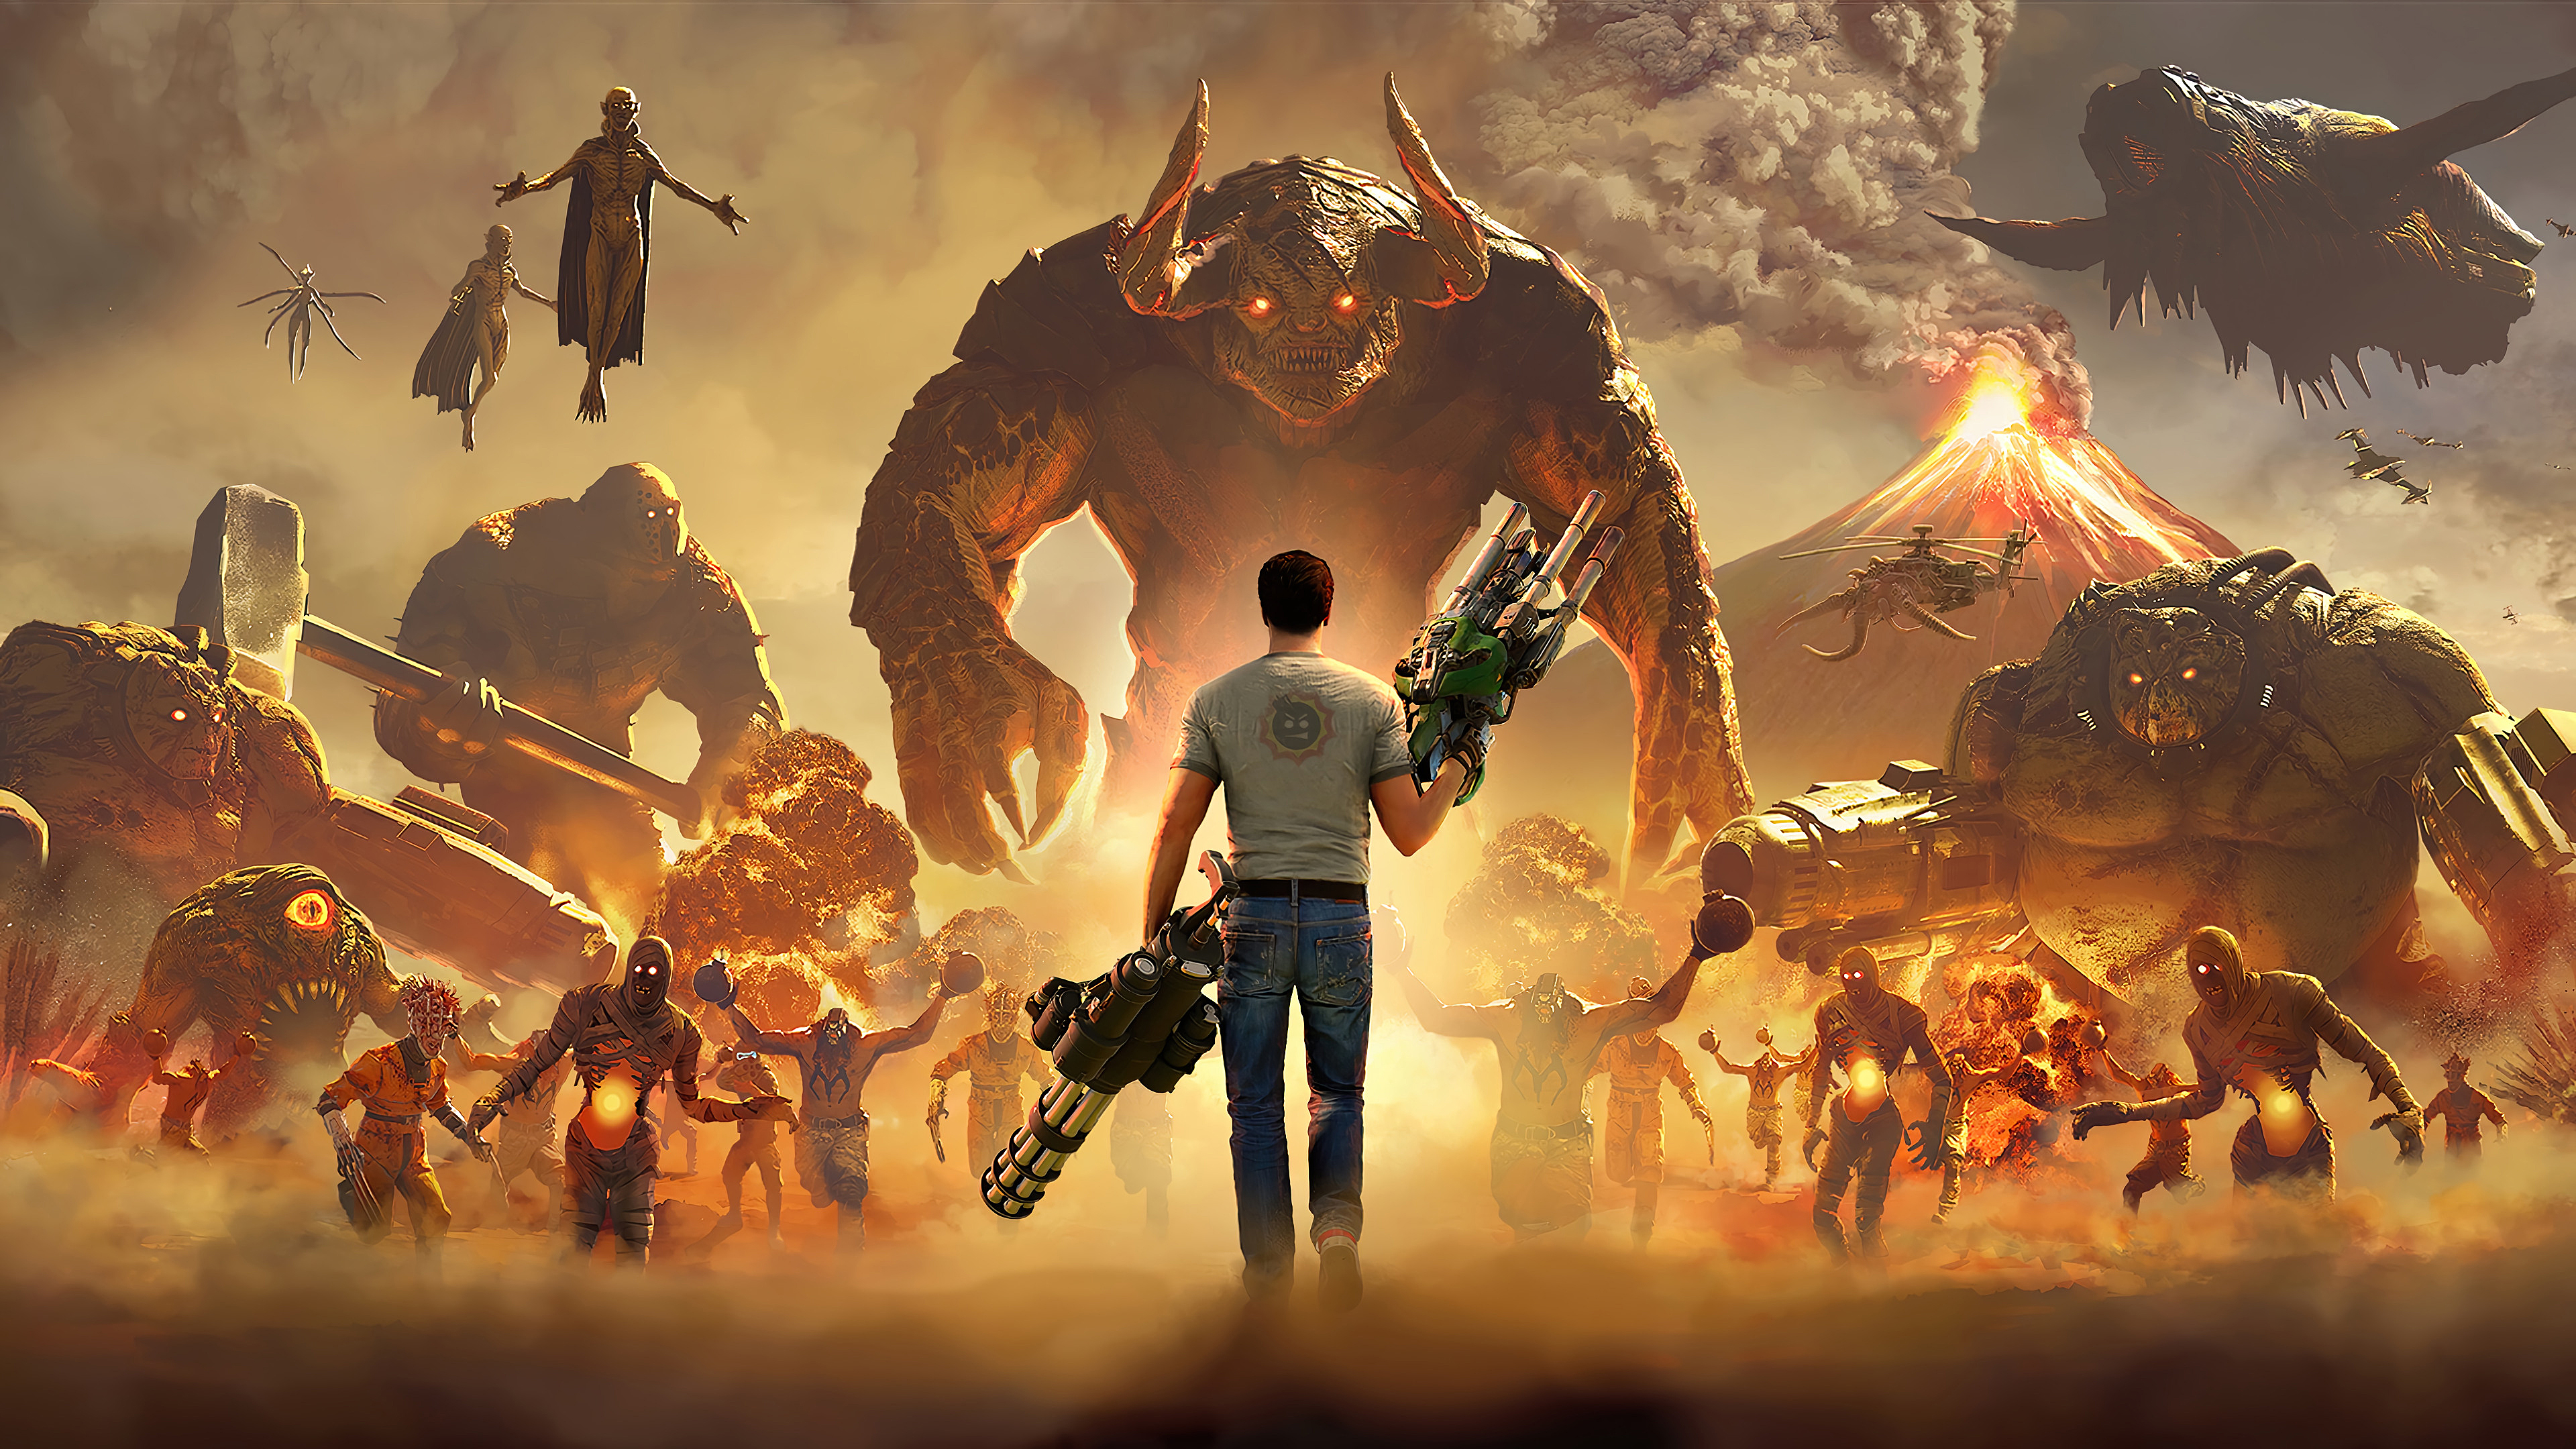 Game posters. Serious Sam 4. Serious Sam 4: Planet Badass. Serious Sam 4 Постер. Serious Sam 4 обложка.